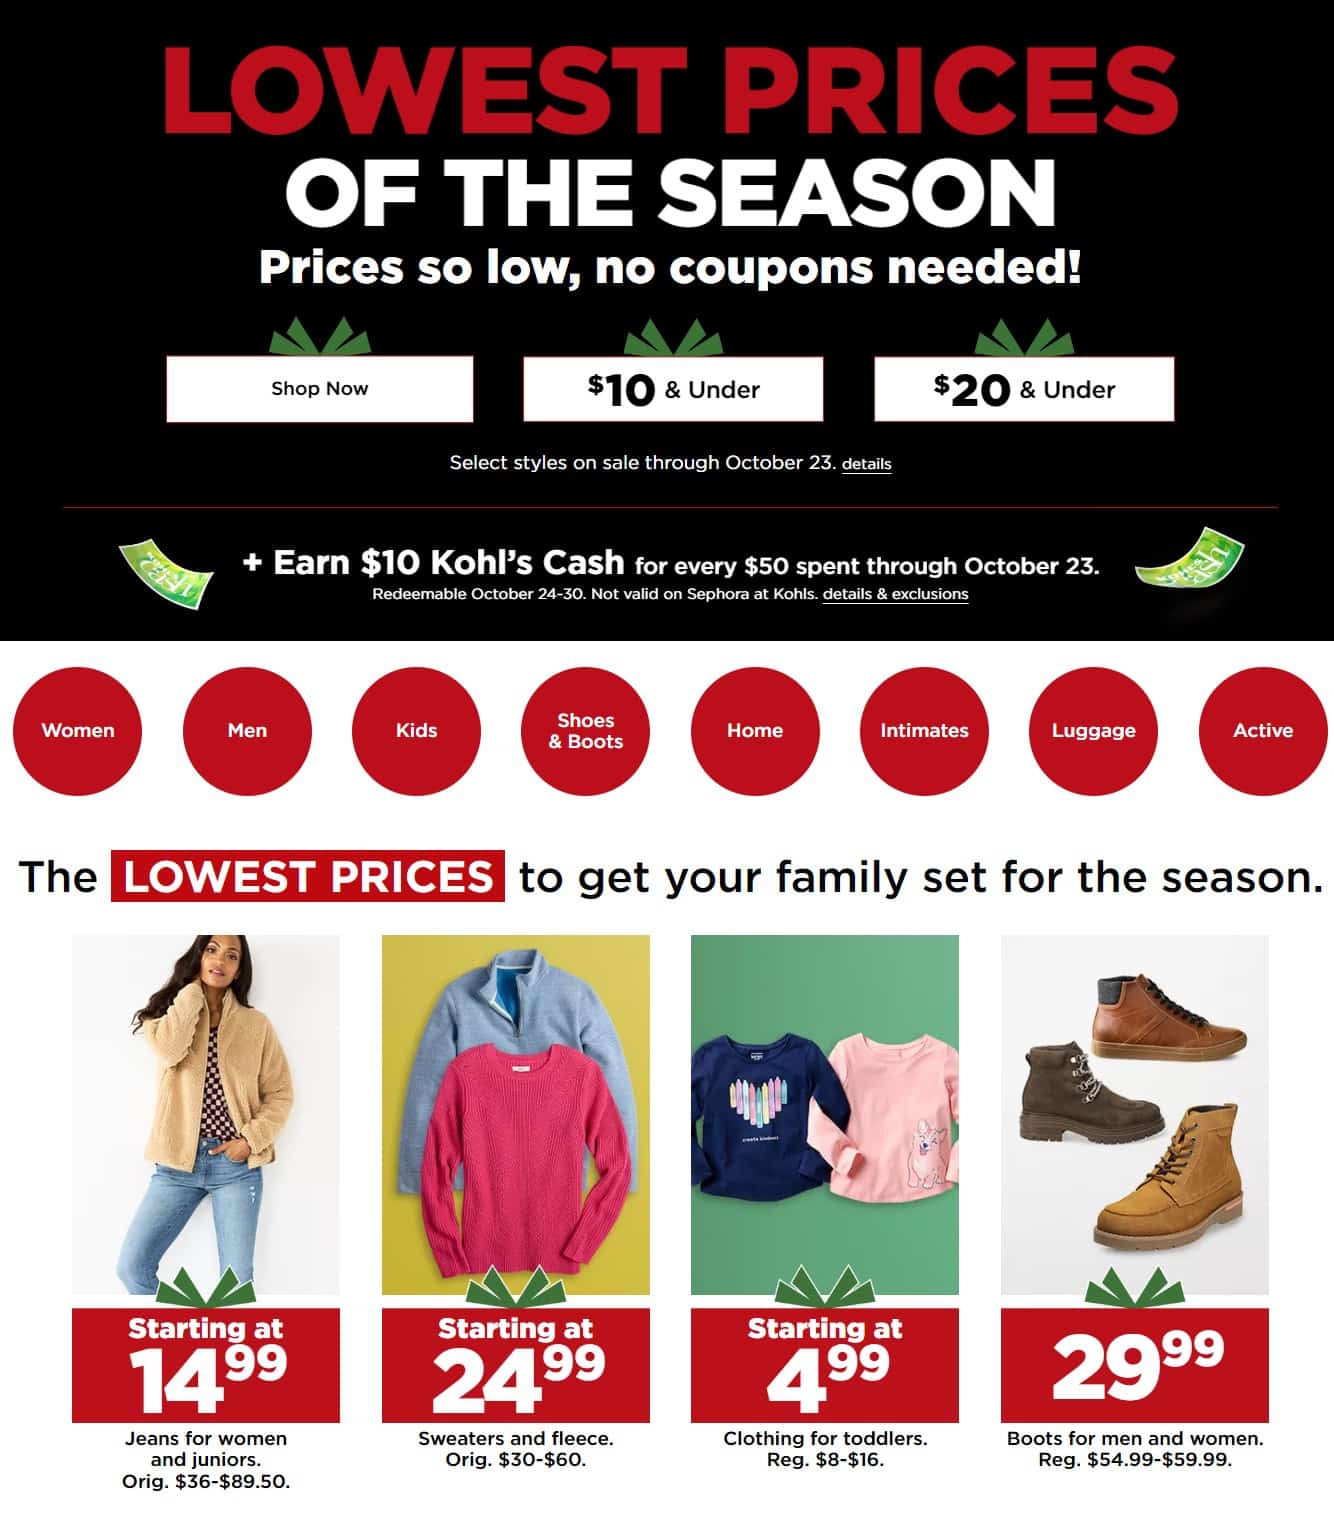 Kohl's Lowest Prices of the Season 2022